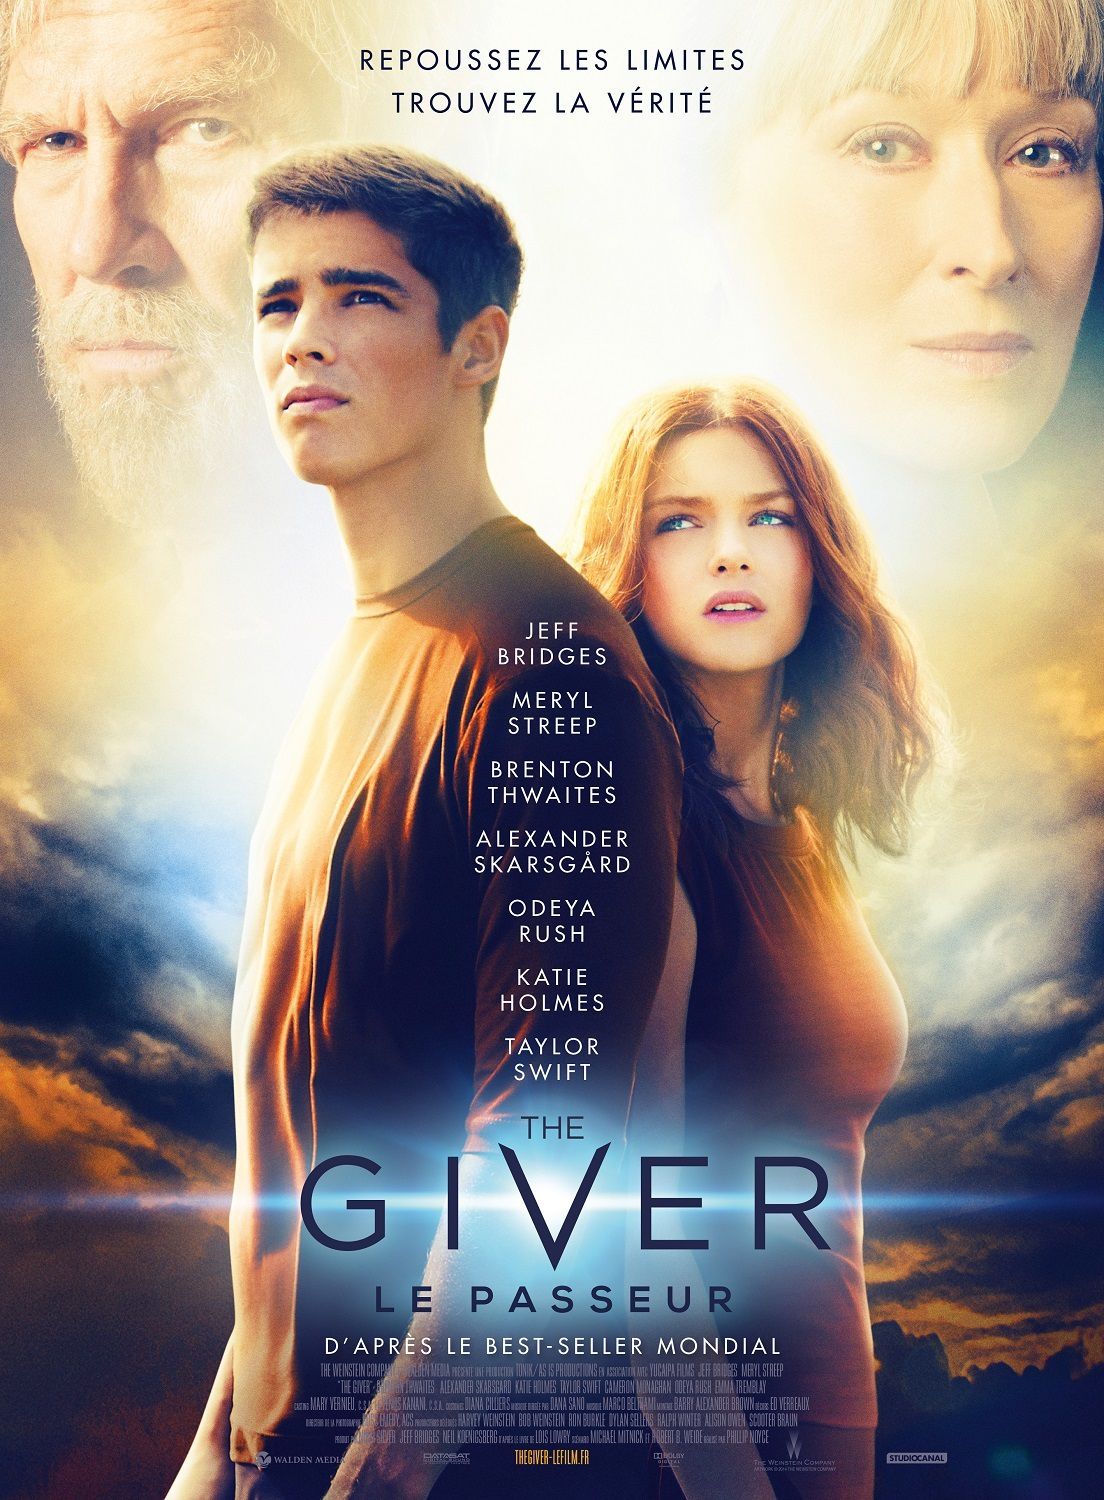 The Giver - Le Passeur - Film (2014) streaming VF gratuit complet